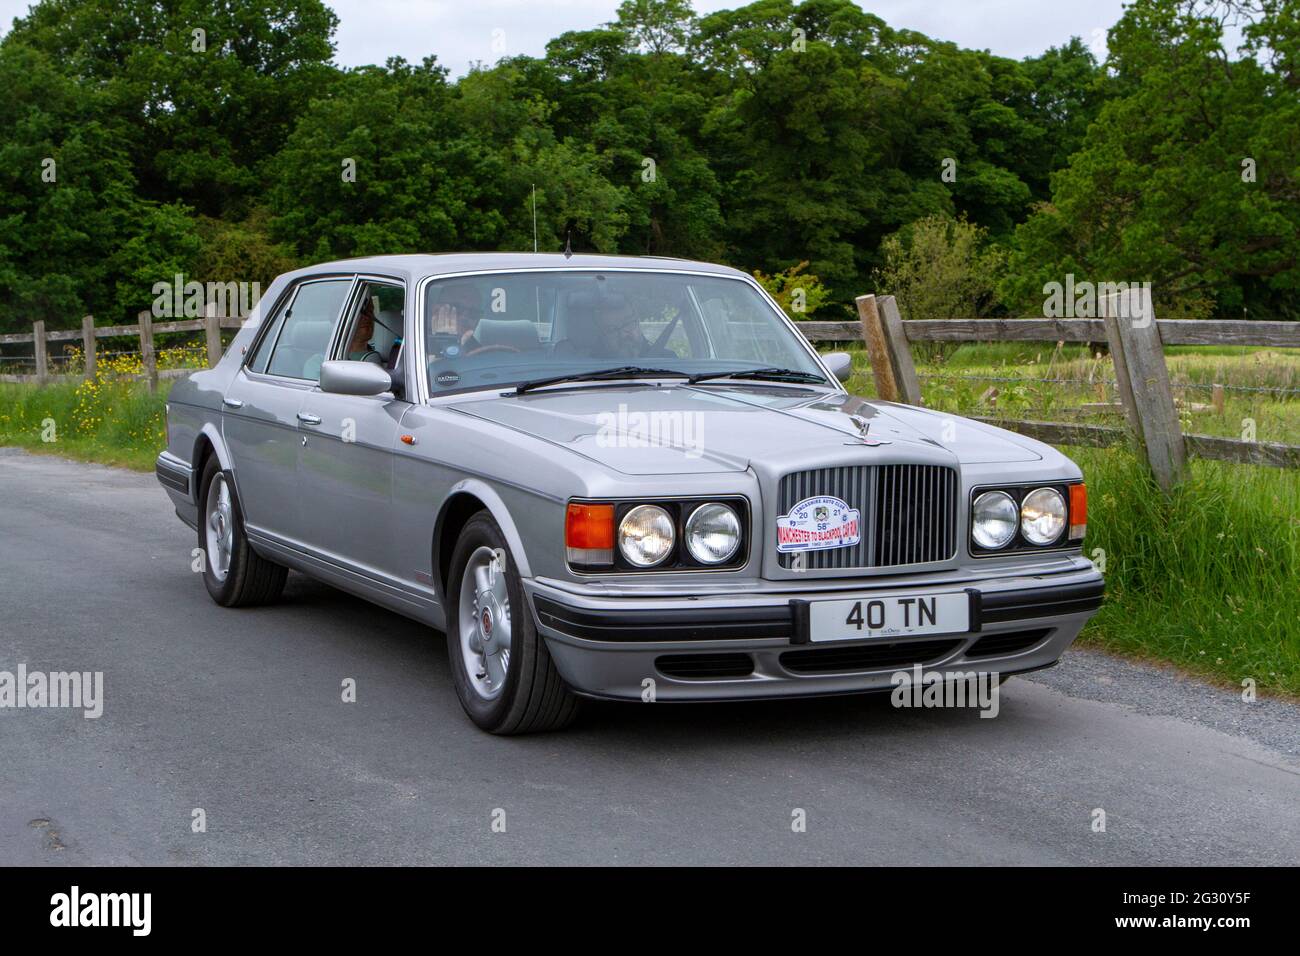 1997 90s silver Bentley Turbo R Lwb; at the 58th Annual Manchester to Blackpool Vintage & Classic Car Run The event is a ‘Touring Assembly’ Stock Photo